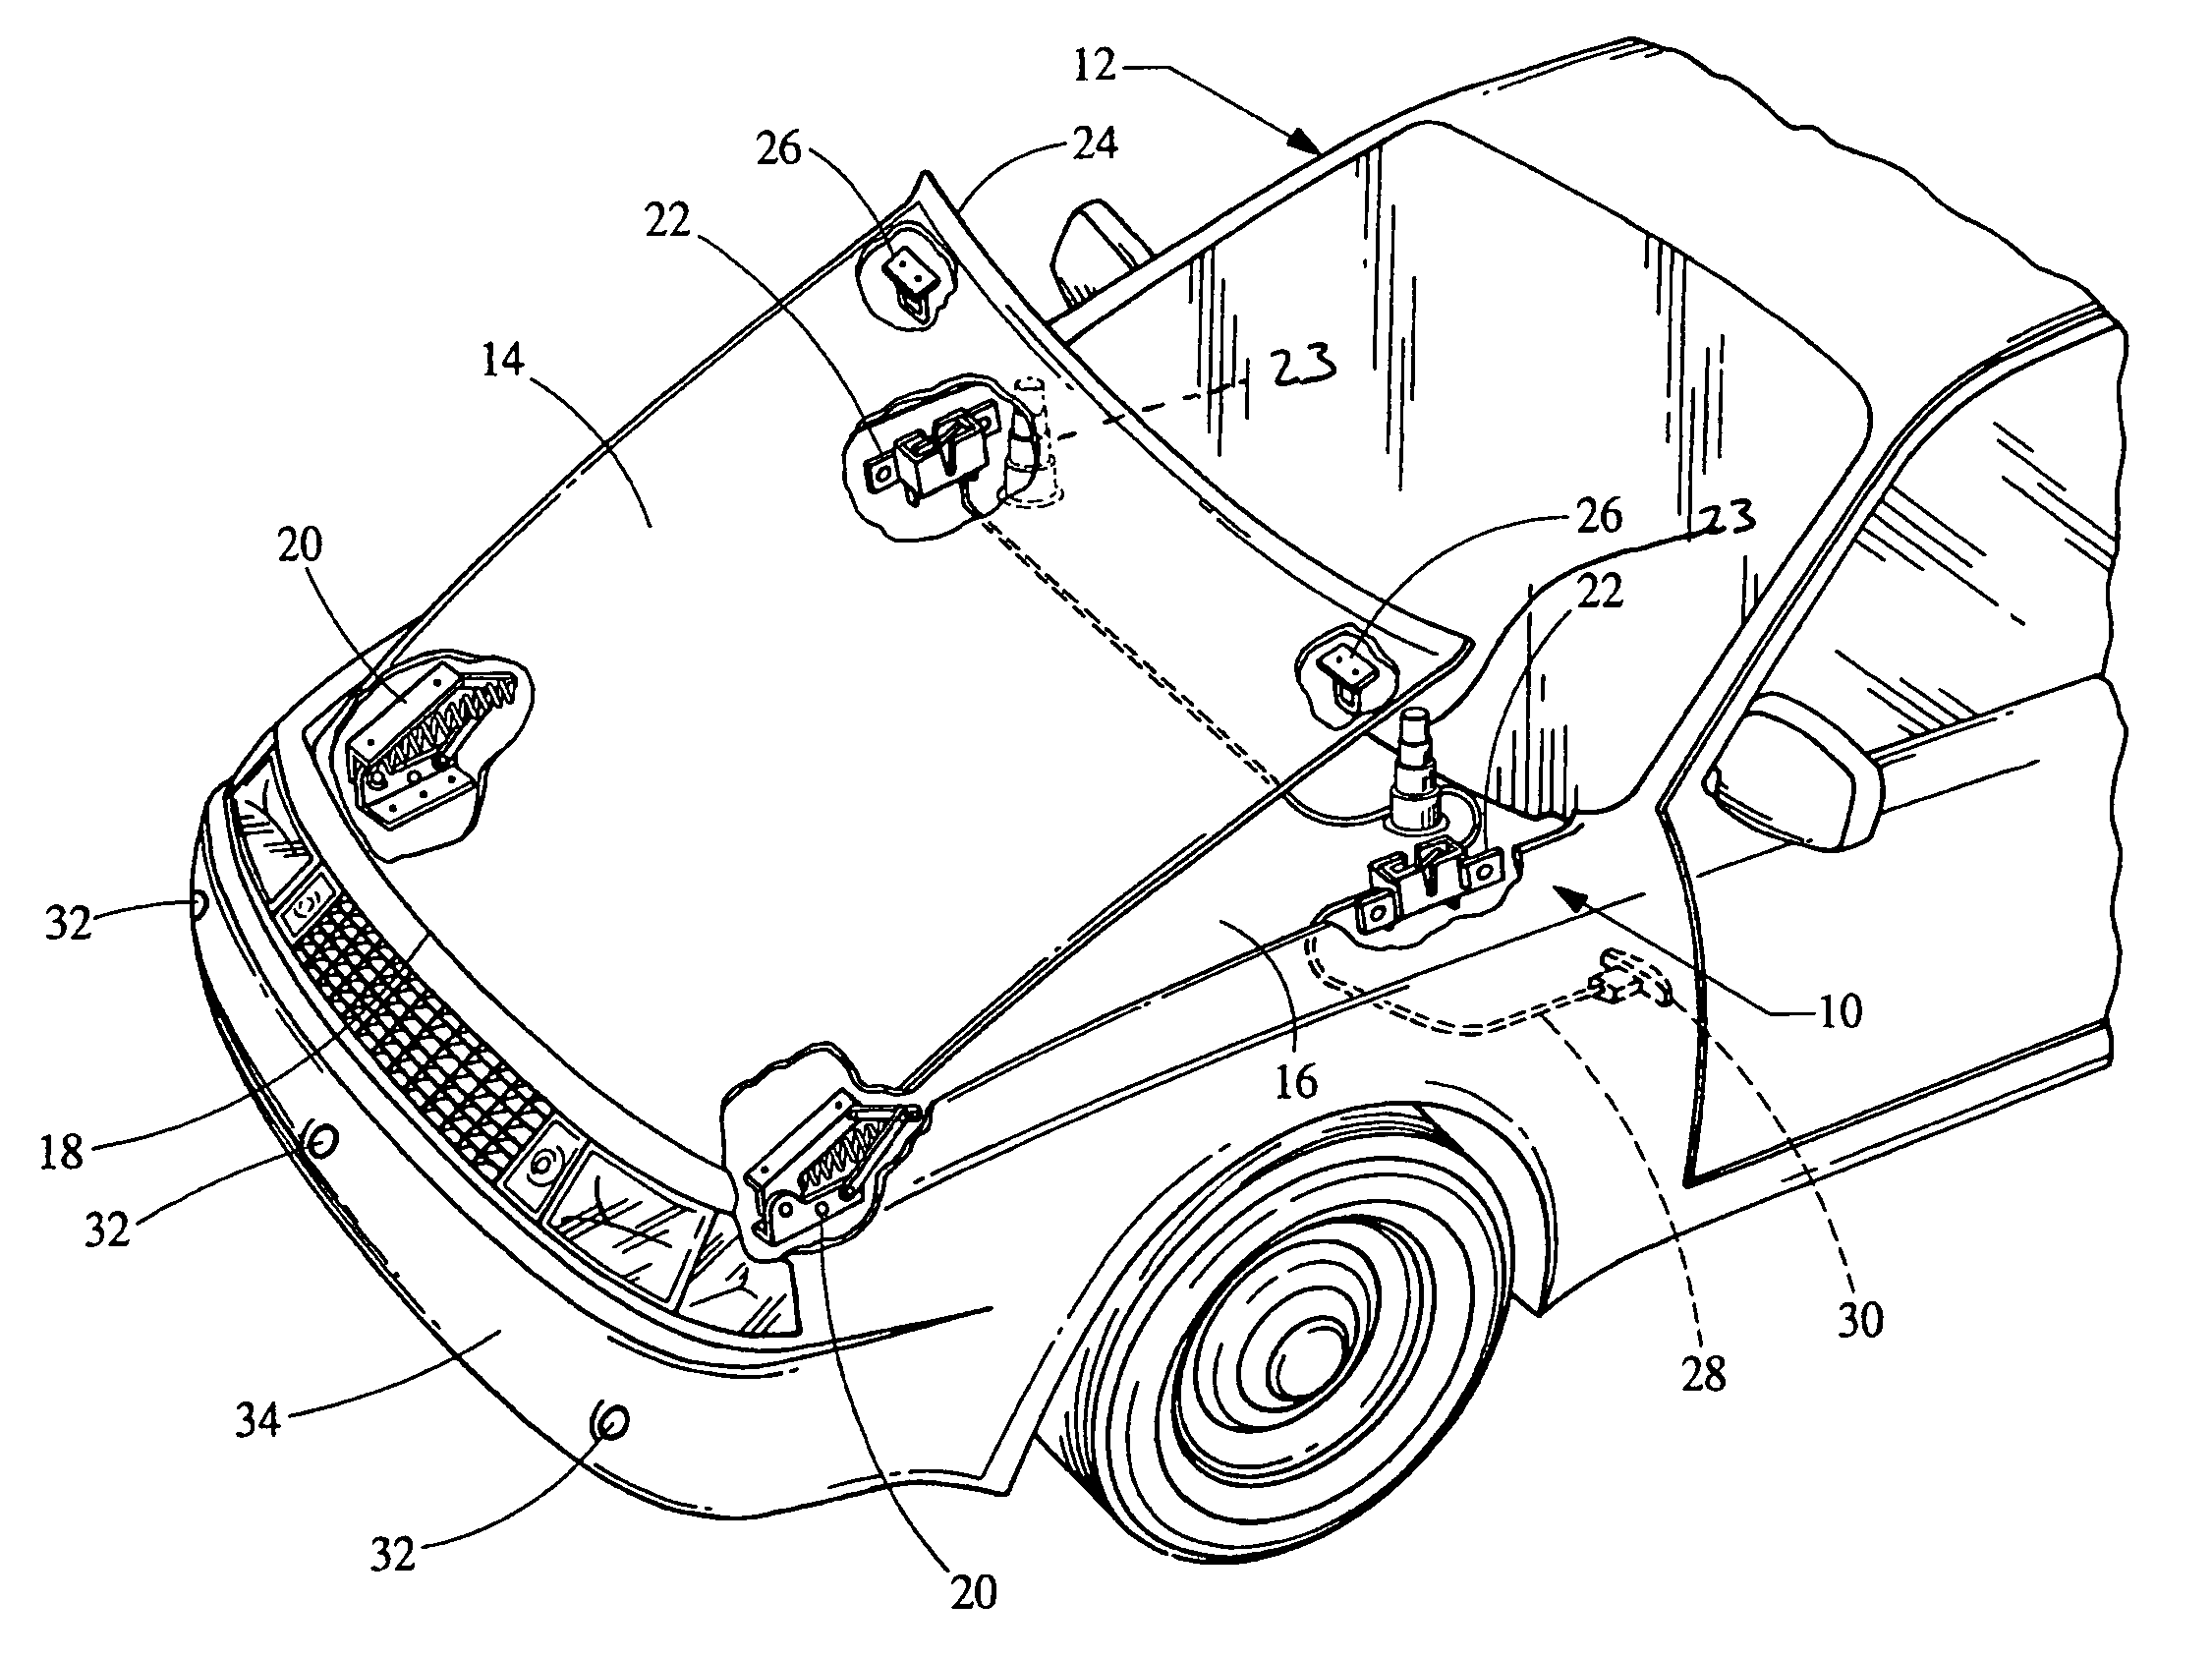 Vehicle hood latch release system for improved pedestrian protection